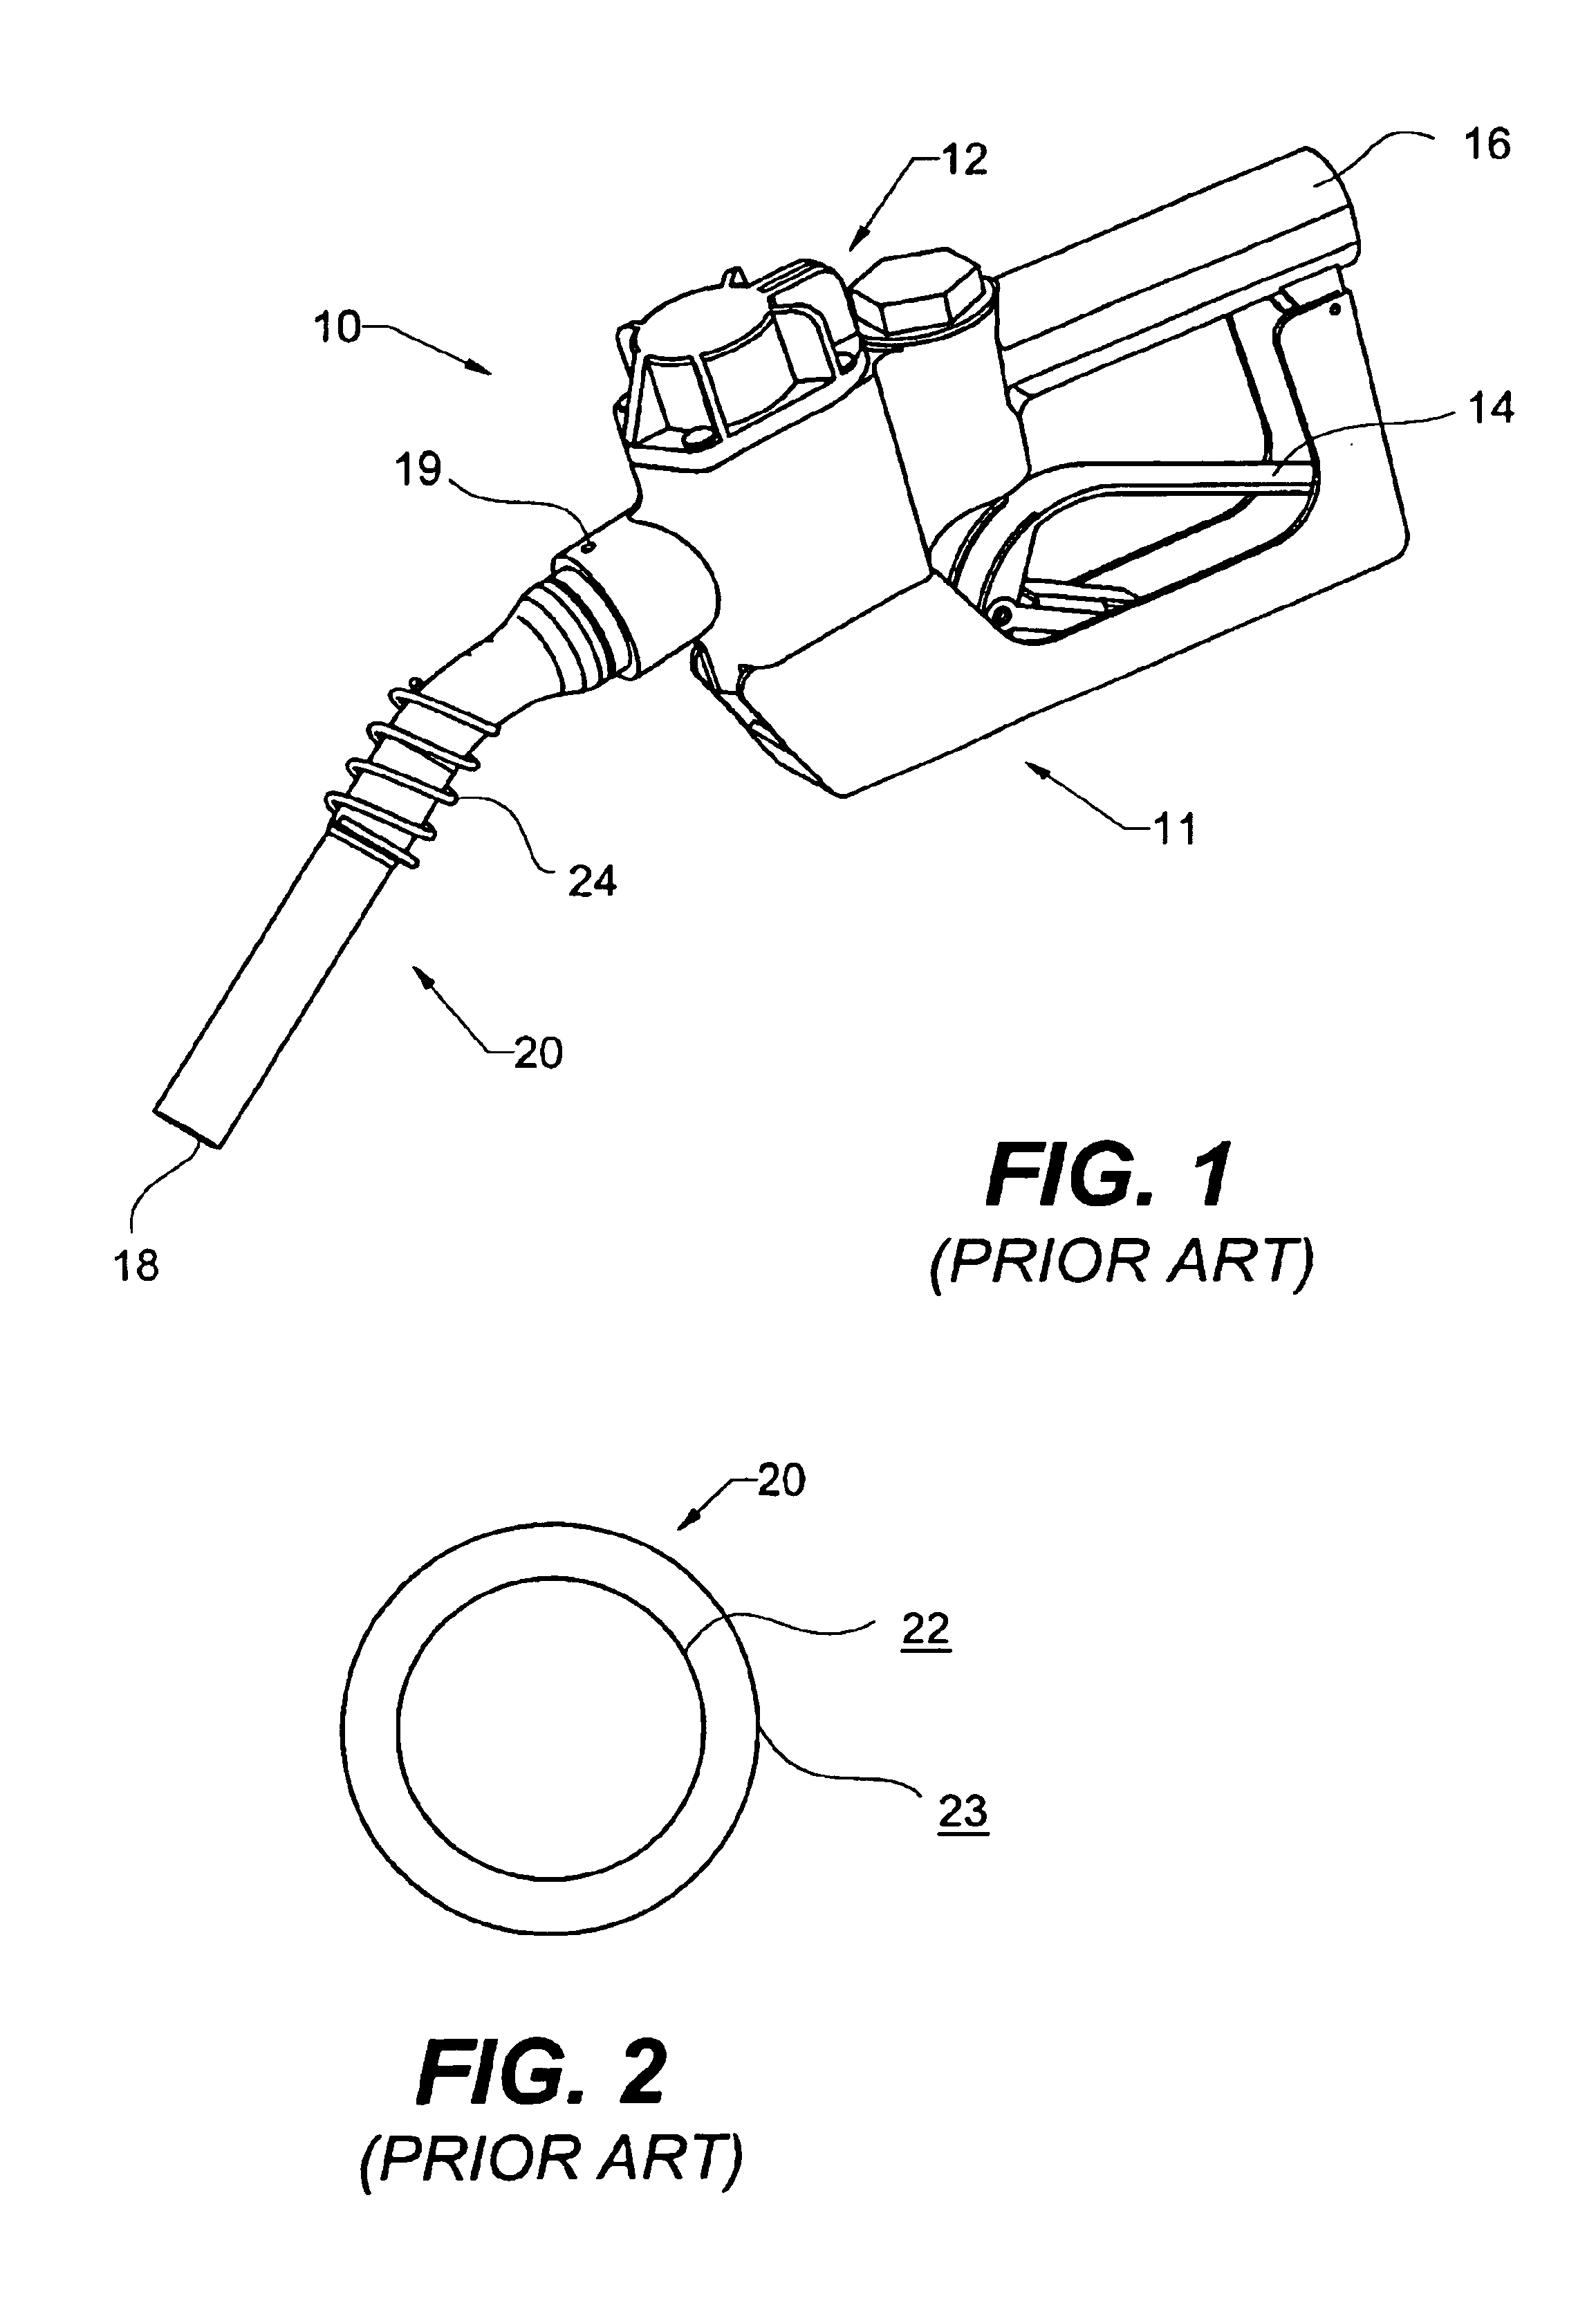 Low surface energy dripless fuel spout